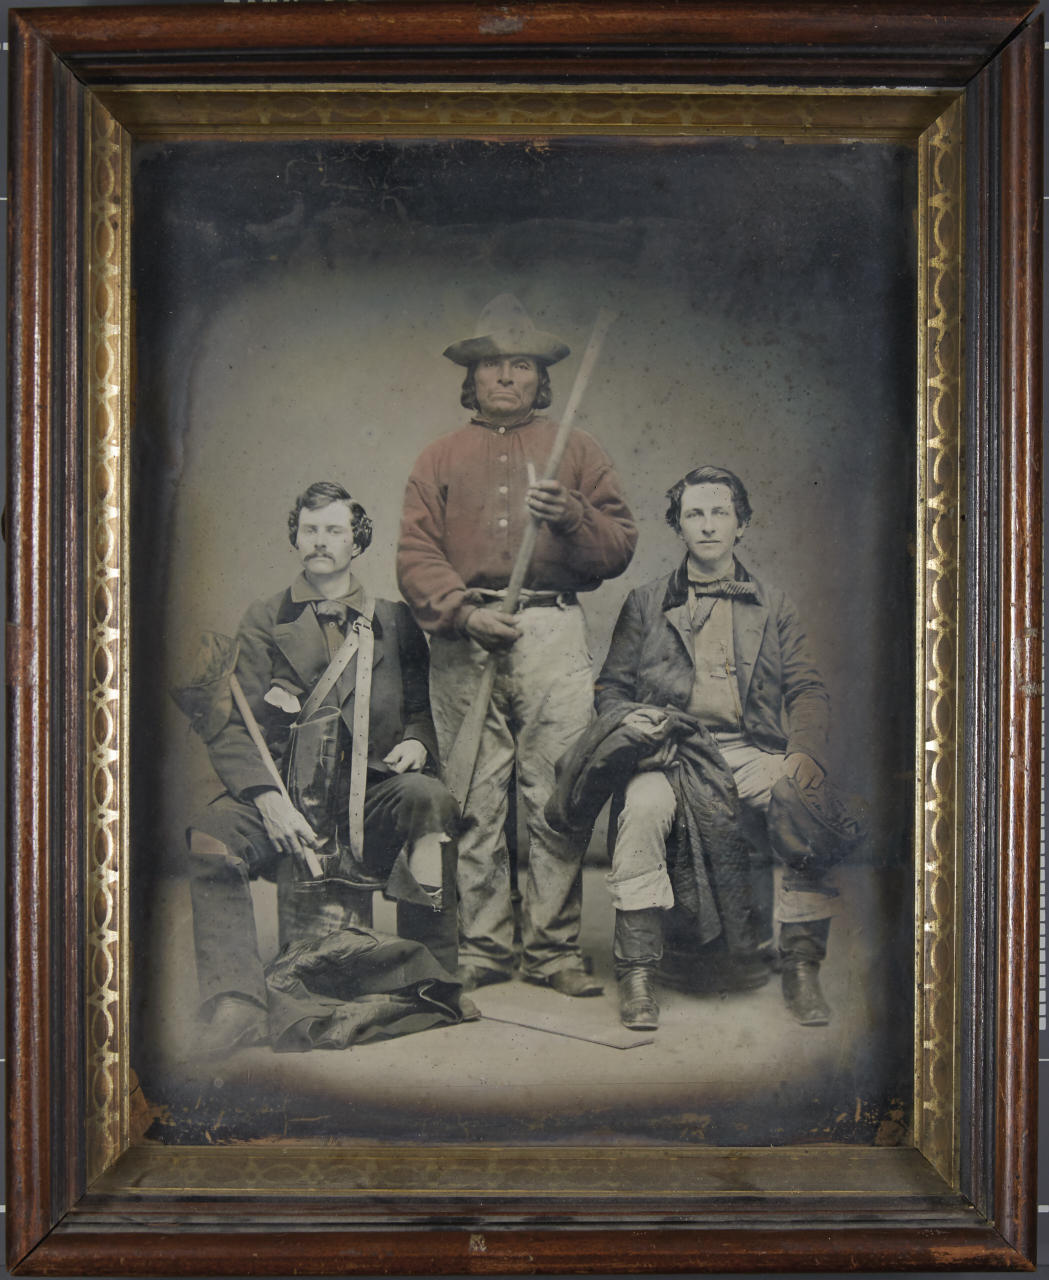 ANONYMOUS PHOTOGRAPHER Two explorers with their boatman (likely American Indian), USA c. 1858